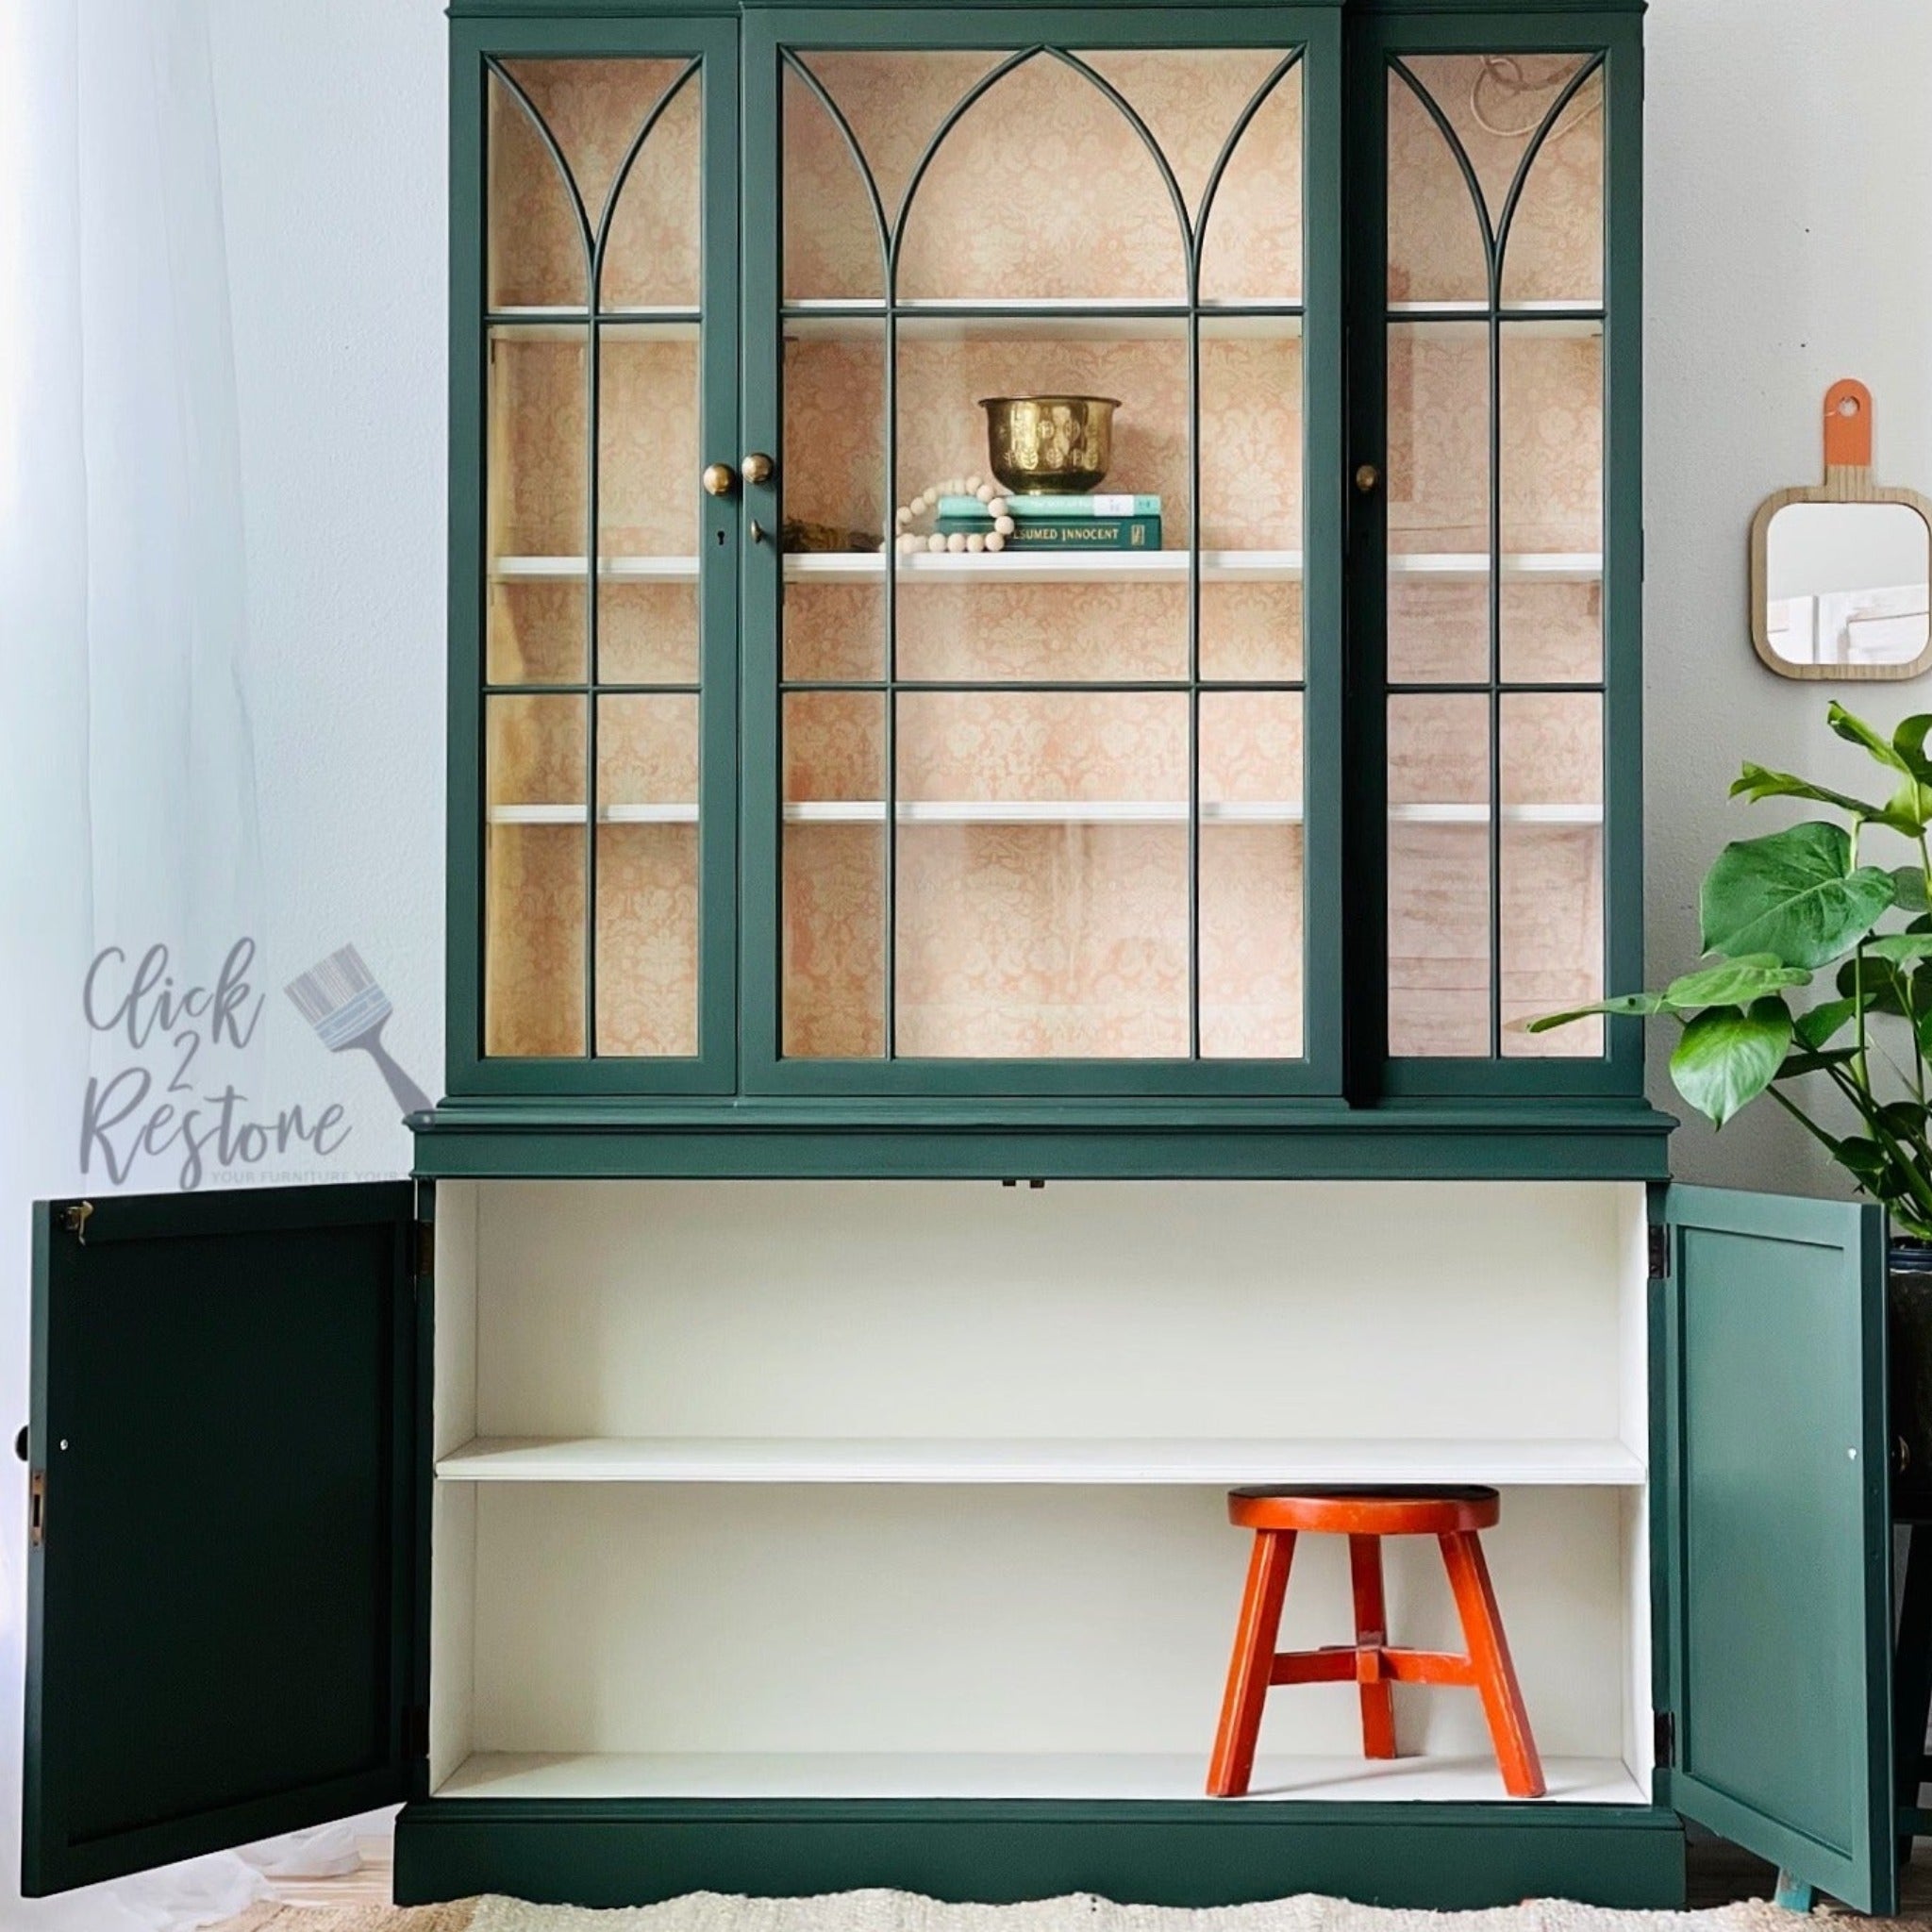 A large hutch refurbished by Click 2 Restore is painted green and features ReDesign with Prima's Peach Damask tissue paper on the inside of the hutch top.